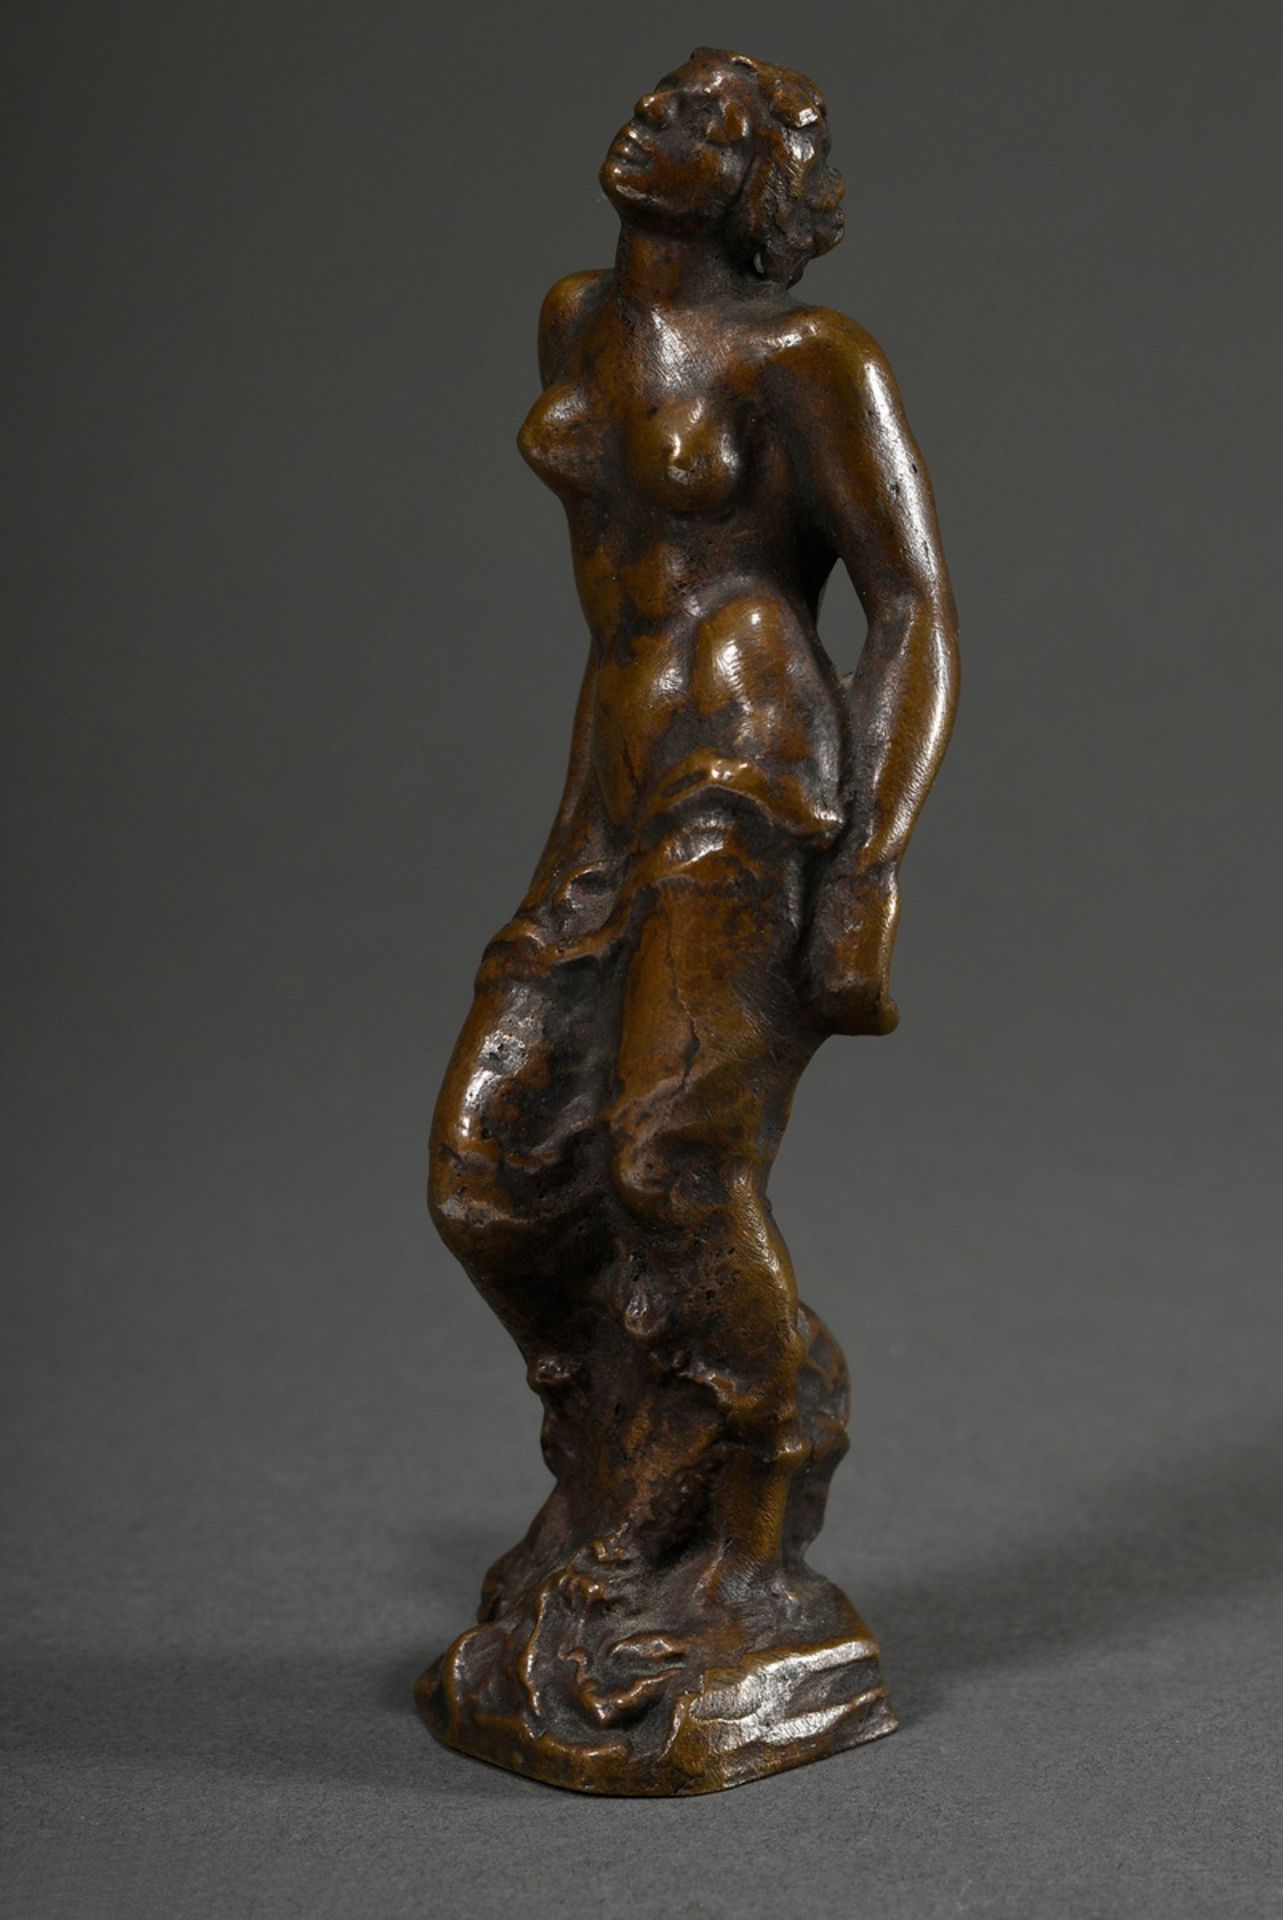 Schreitmüller, August (1871-1958) "Umbrandet" c. 1910, female nude with hip scarf and flowing hair, - Image 2 of 7